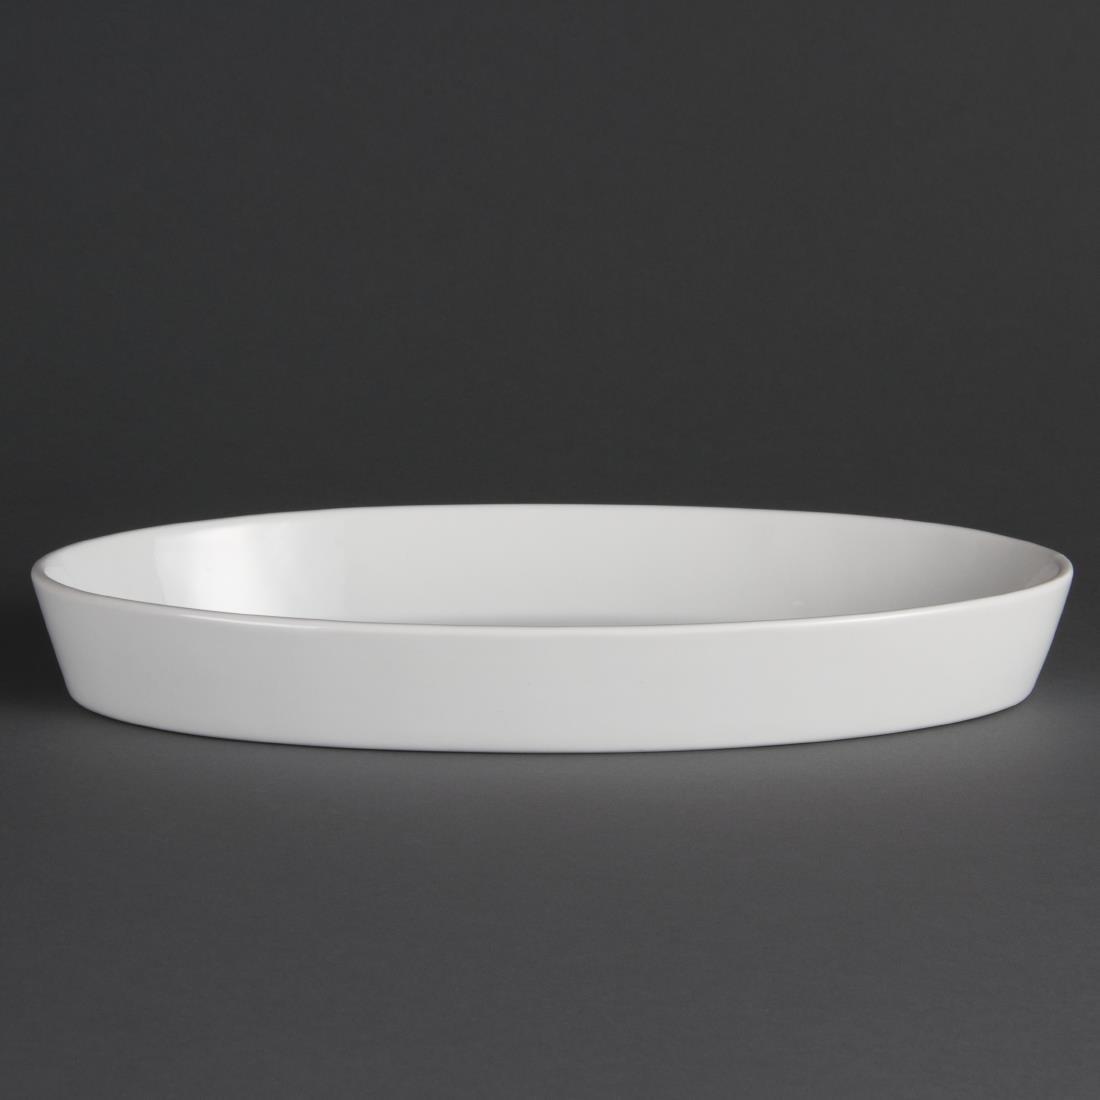 W422 - Olympia Whiteware Oval Sole Dish